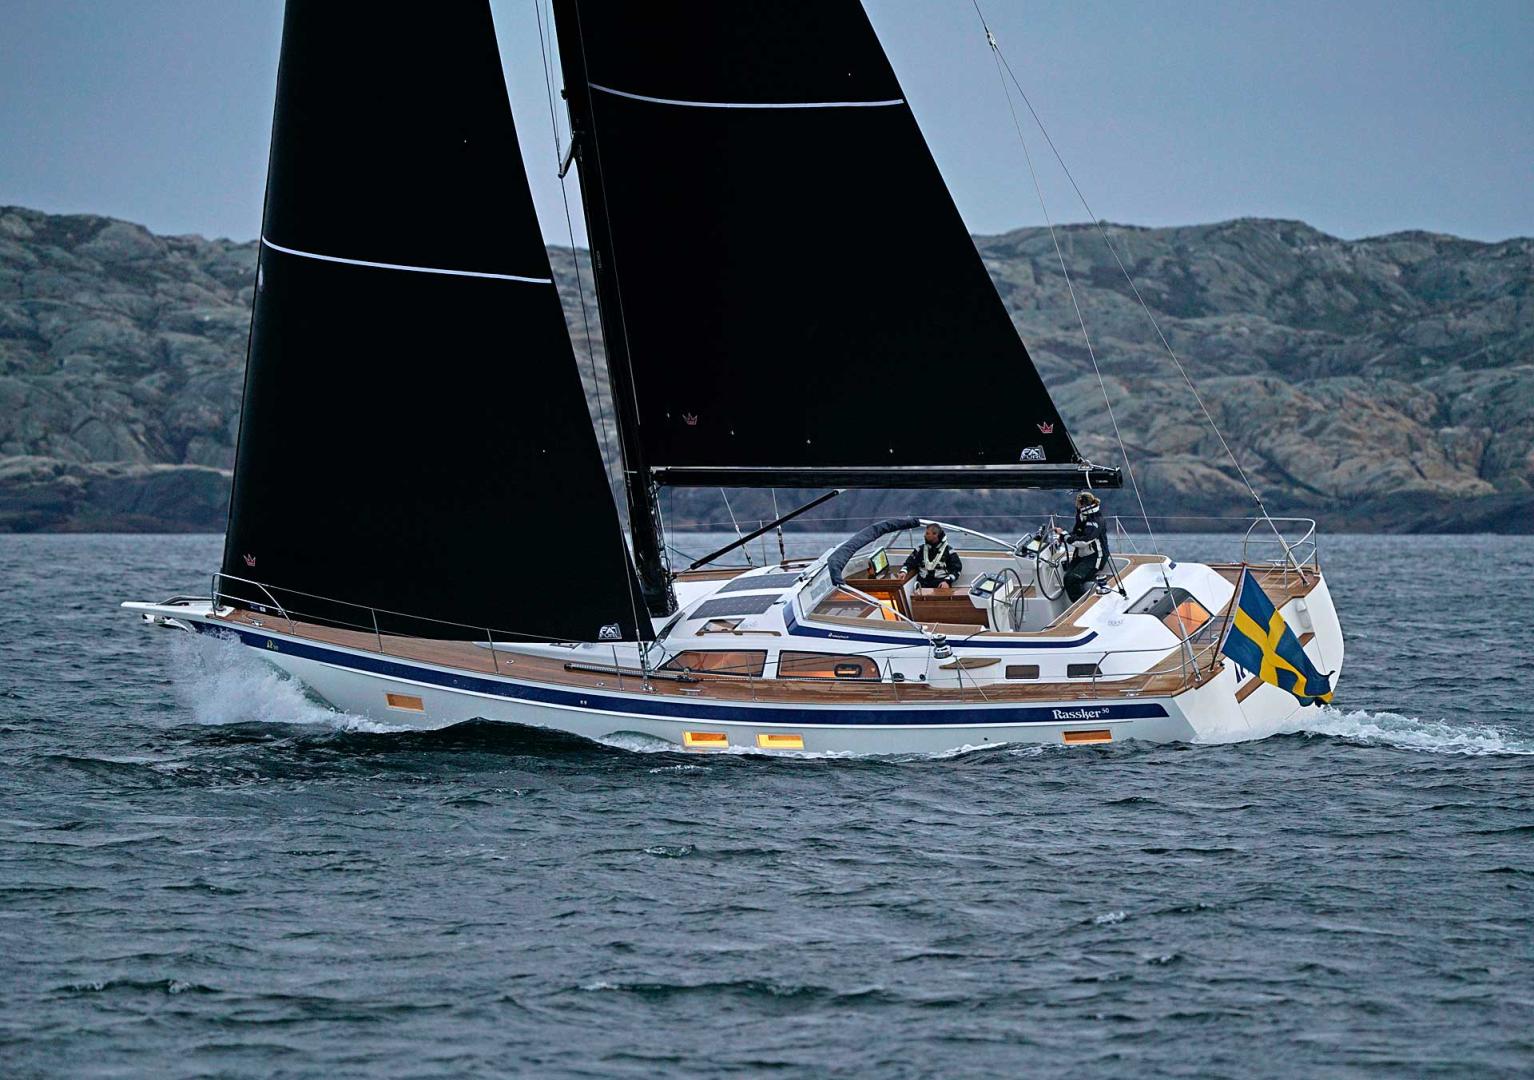 Cruising sailors are now starting to seek the performance advantages of carbon masts but they still require the convenience of in-mast furling.